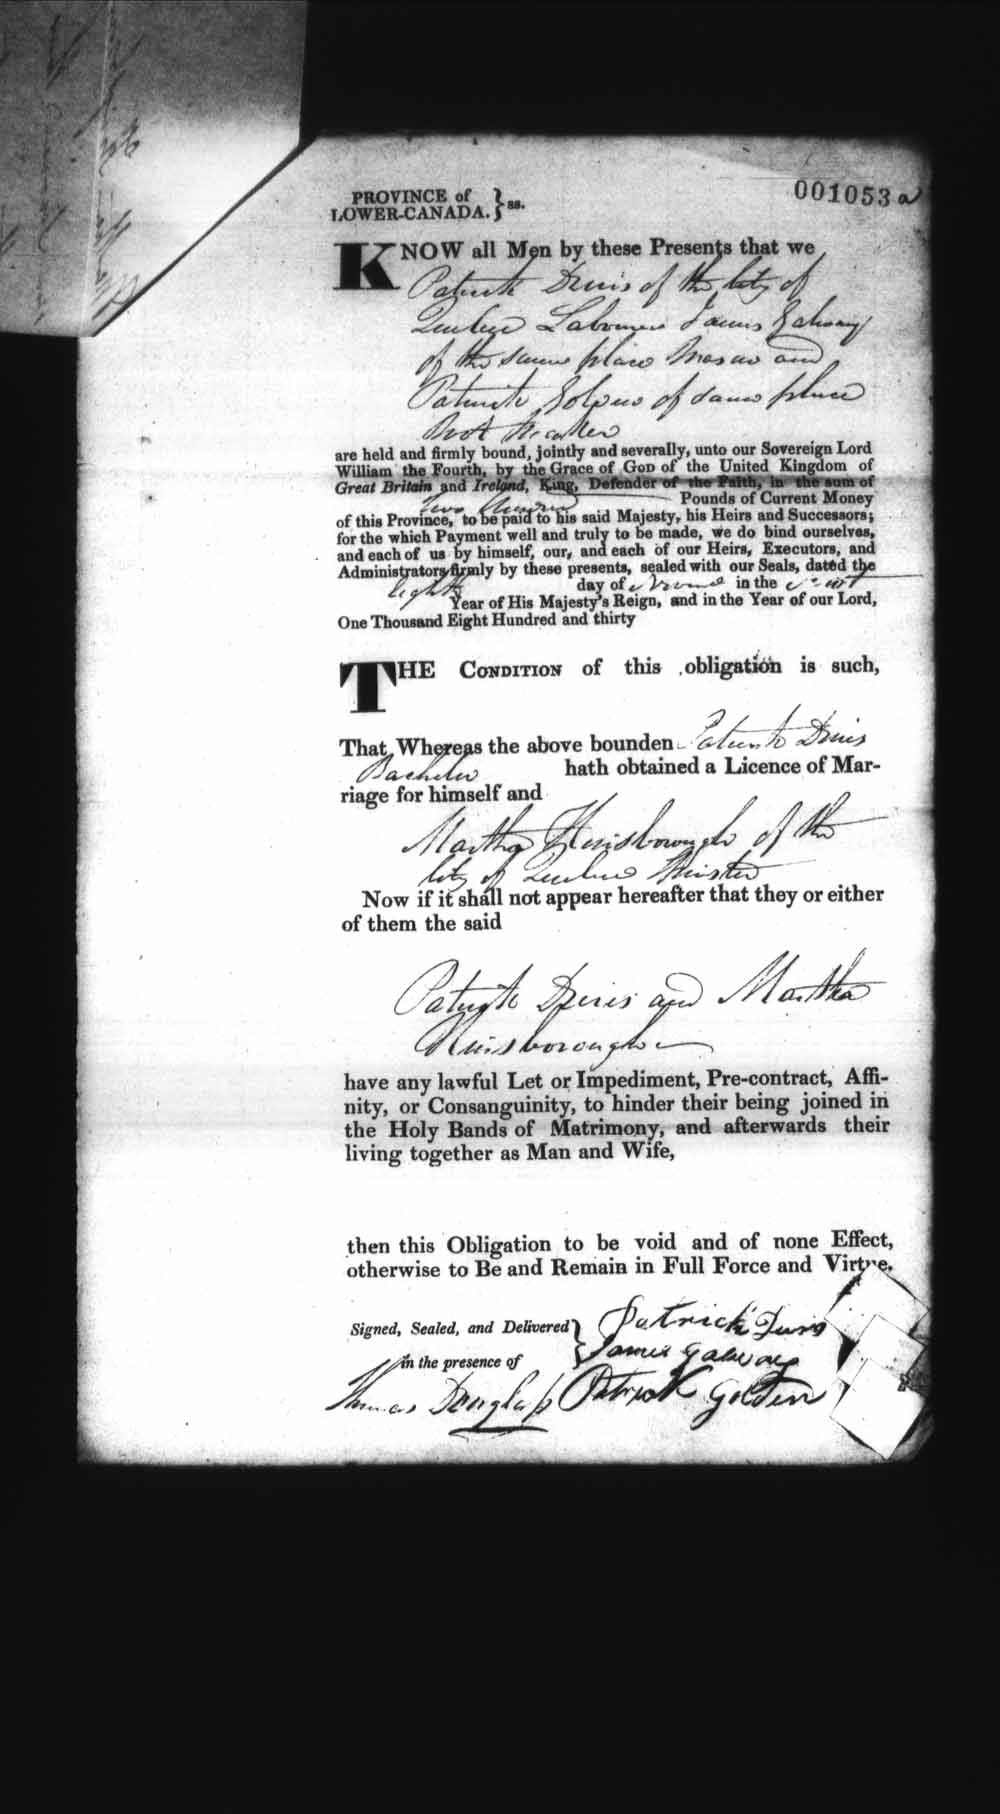 Digitized page of Upper and Lower Canada Marriage Bonds (1779-1865) for Image No.: e008237178